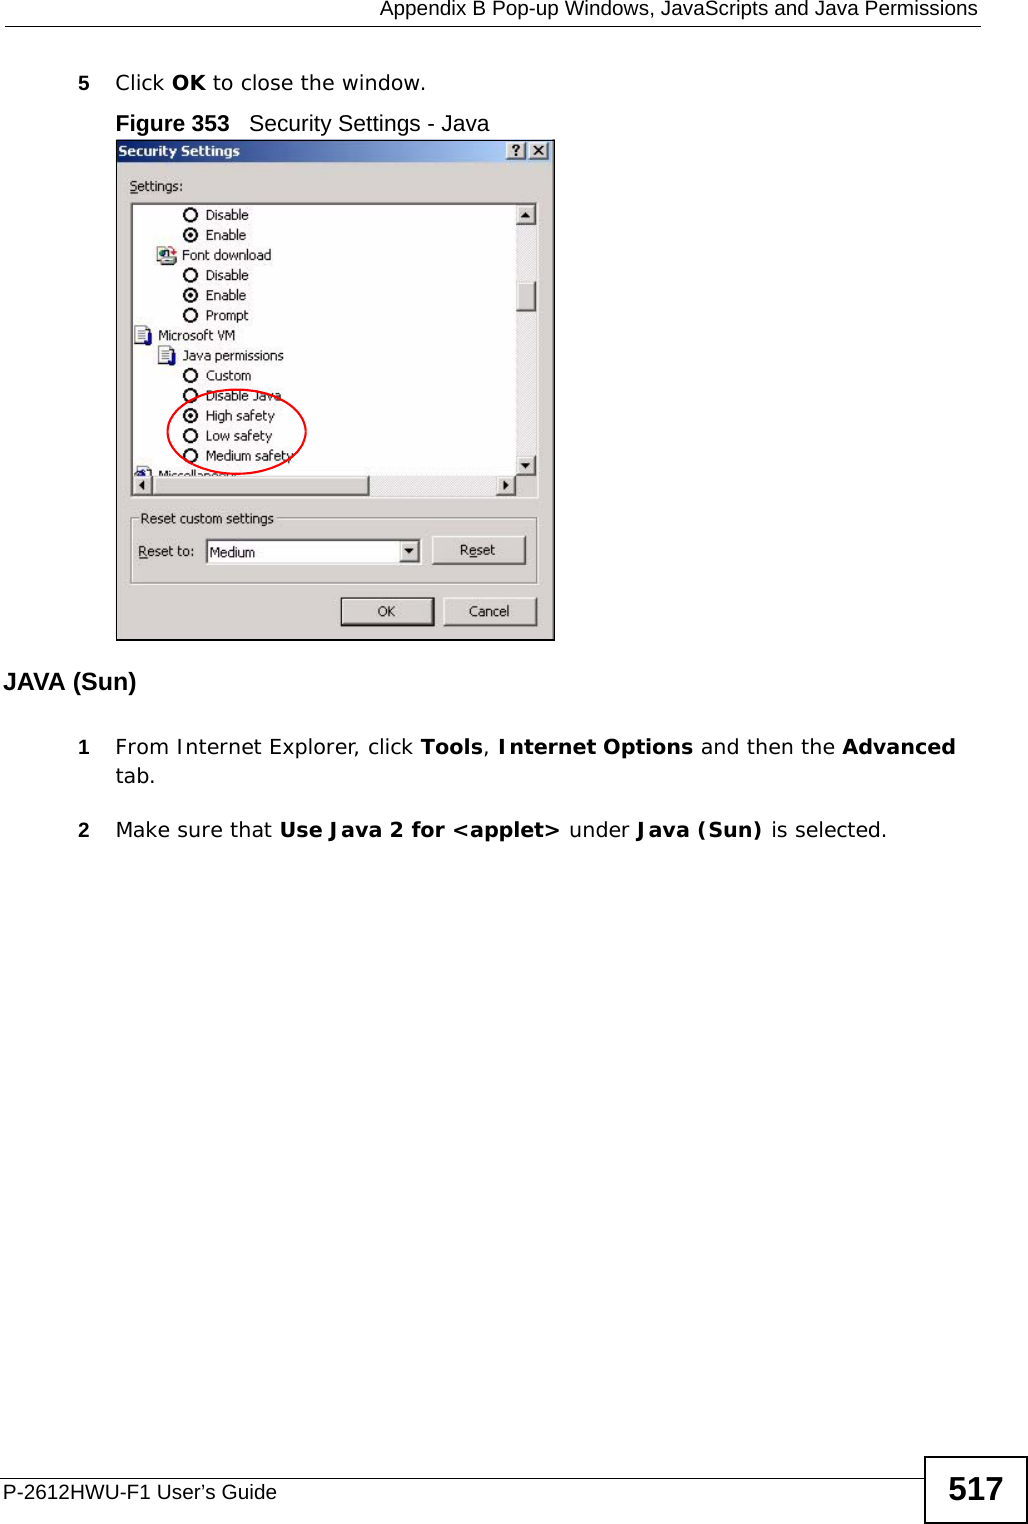  Appendix B Pop-up Windows, JavaScripts and Java PermissionsP-2612HWU-F1 User’s Guide 5175Click OK to close the window.Figure 353   Security Settings - Java JAVA (Sun)1From Internet Explorer, click Tools, Internet Options and then the Advanced tab. 2Make sure that Use Java 2 for &lt;applet&gt; under Java (Sun) is selected.